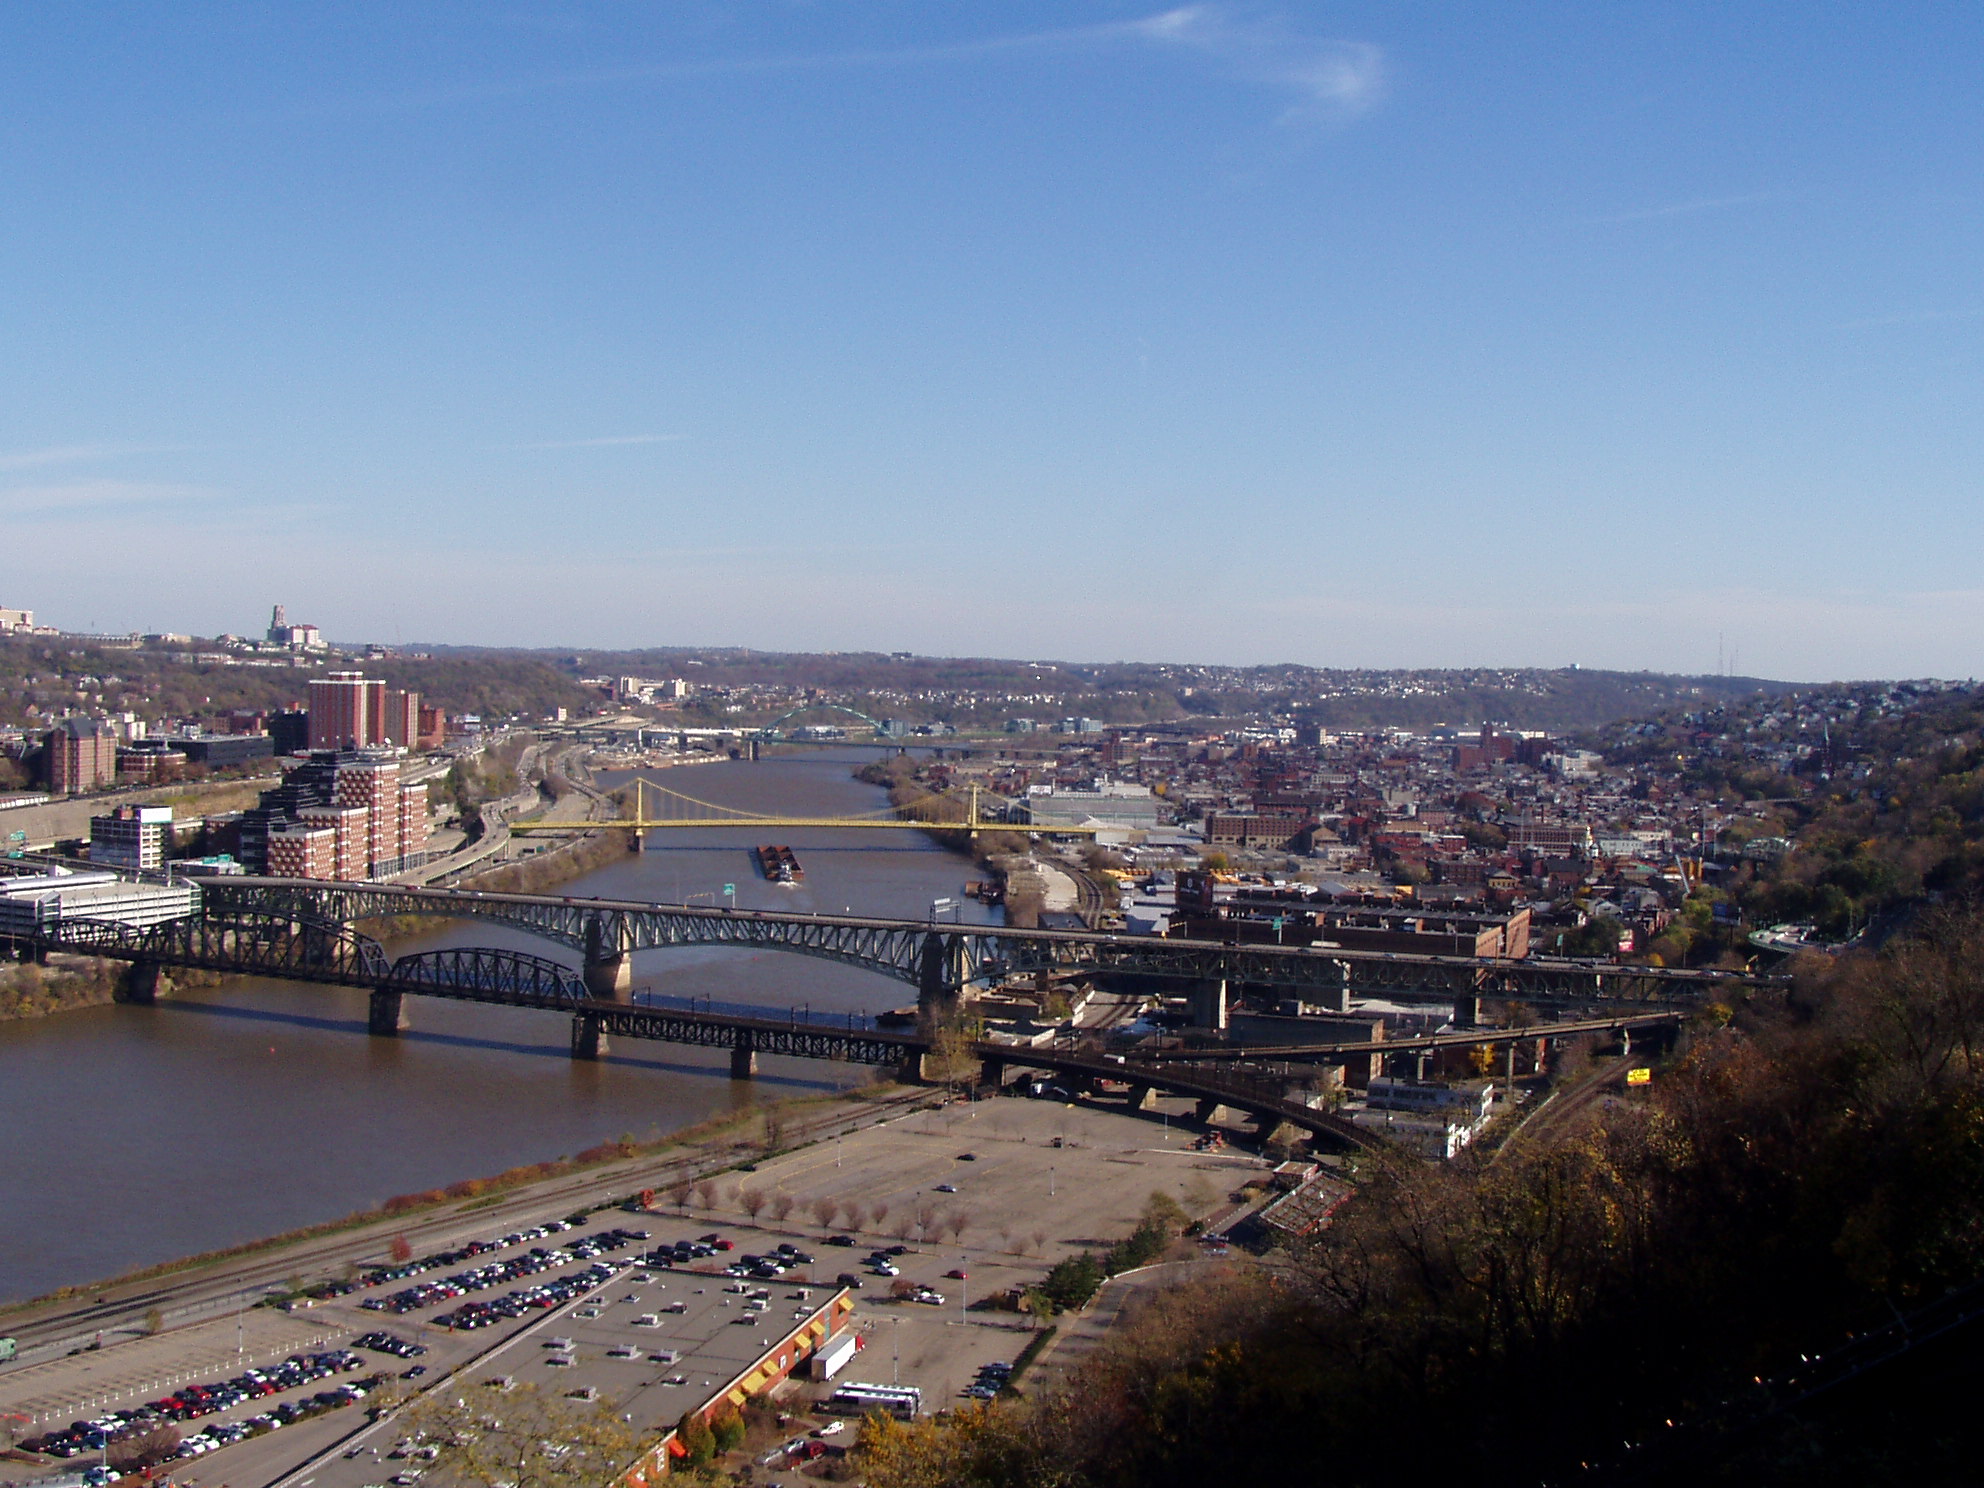 How many bridges are in Pittsburgh